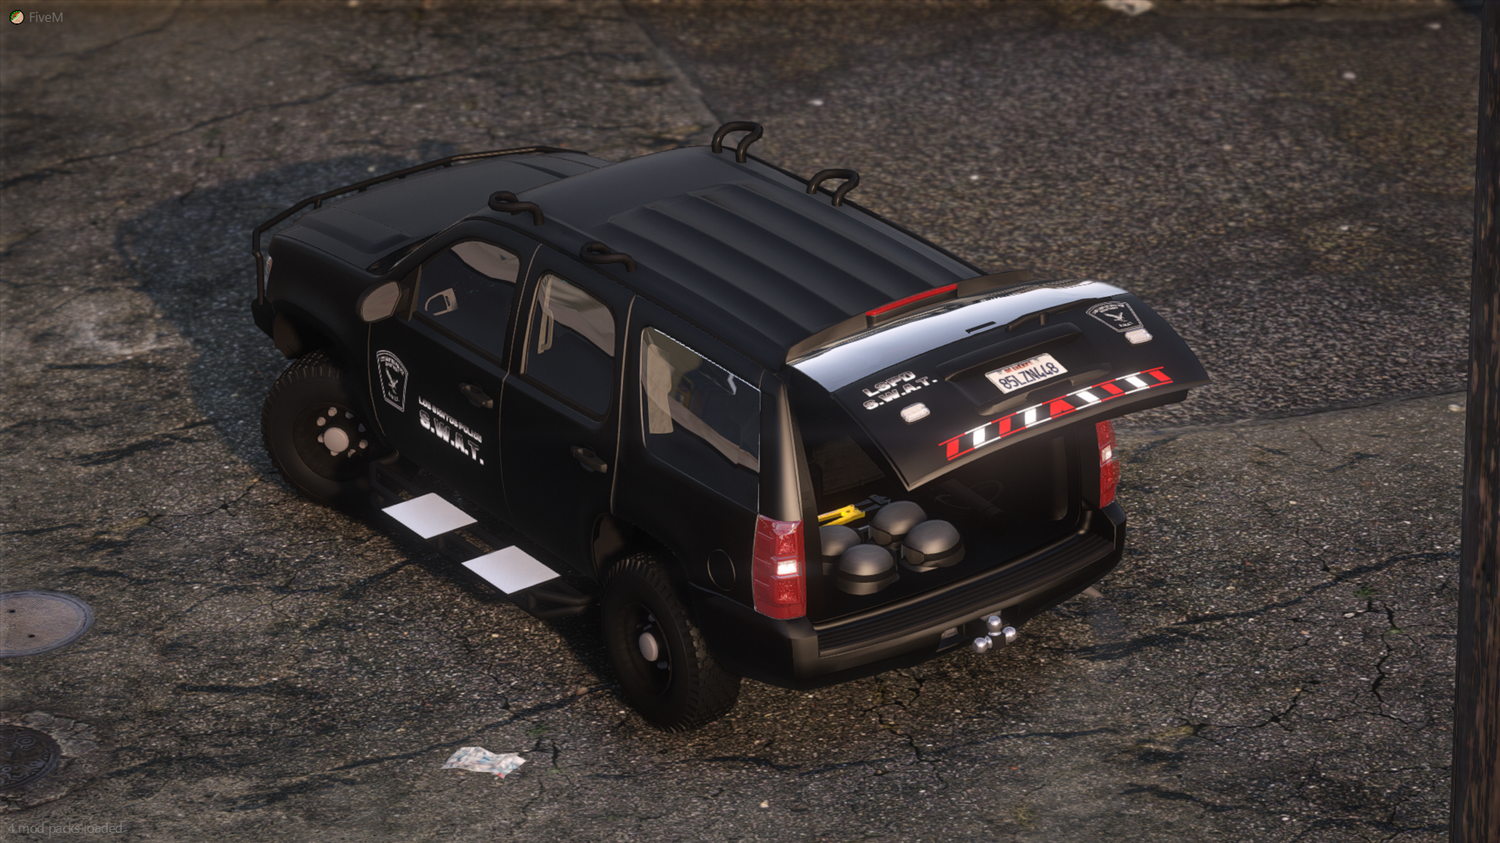 Police S.W.A.T 2014 Generic SUV